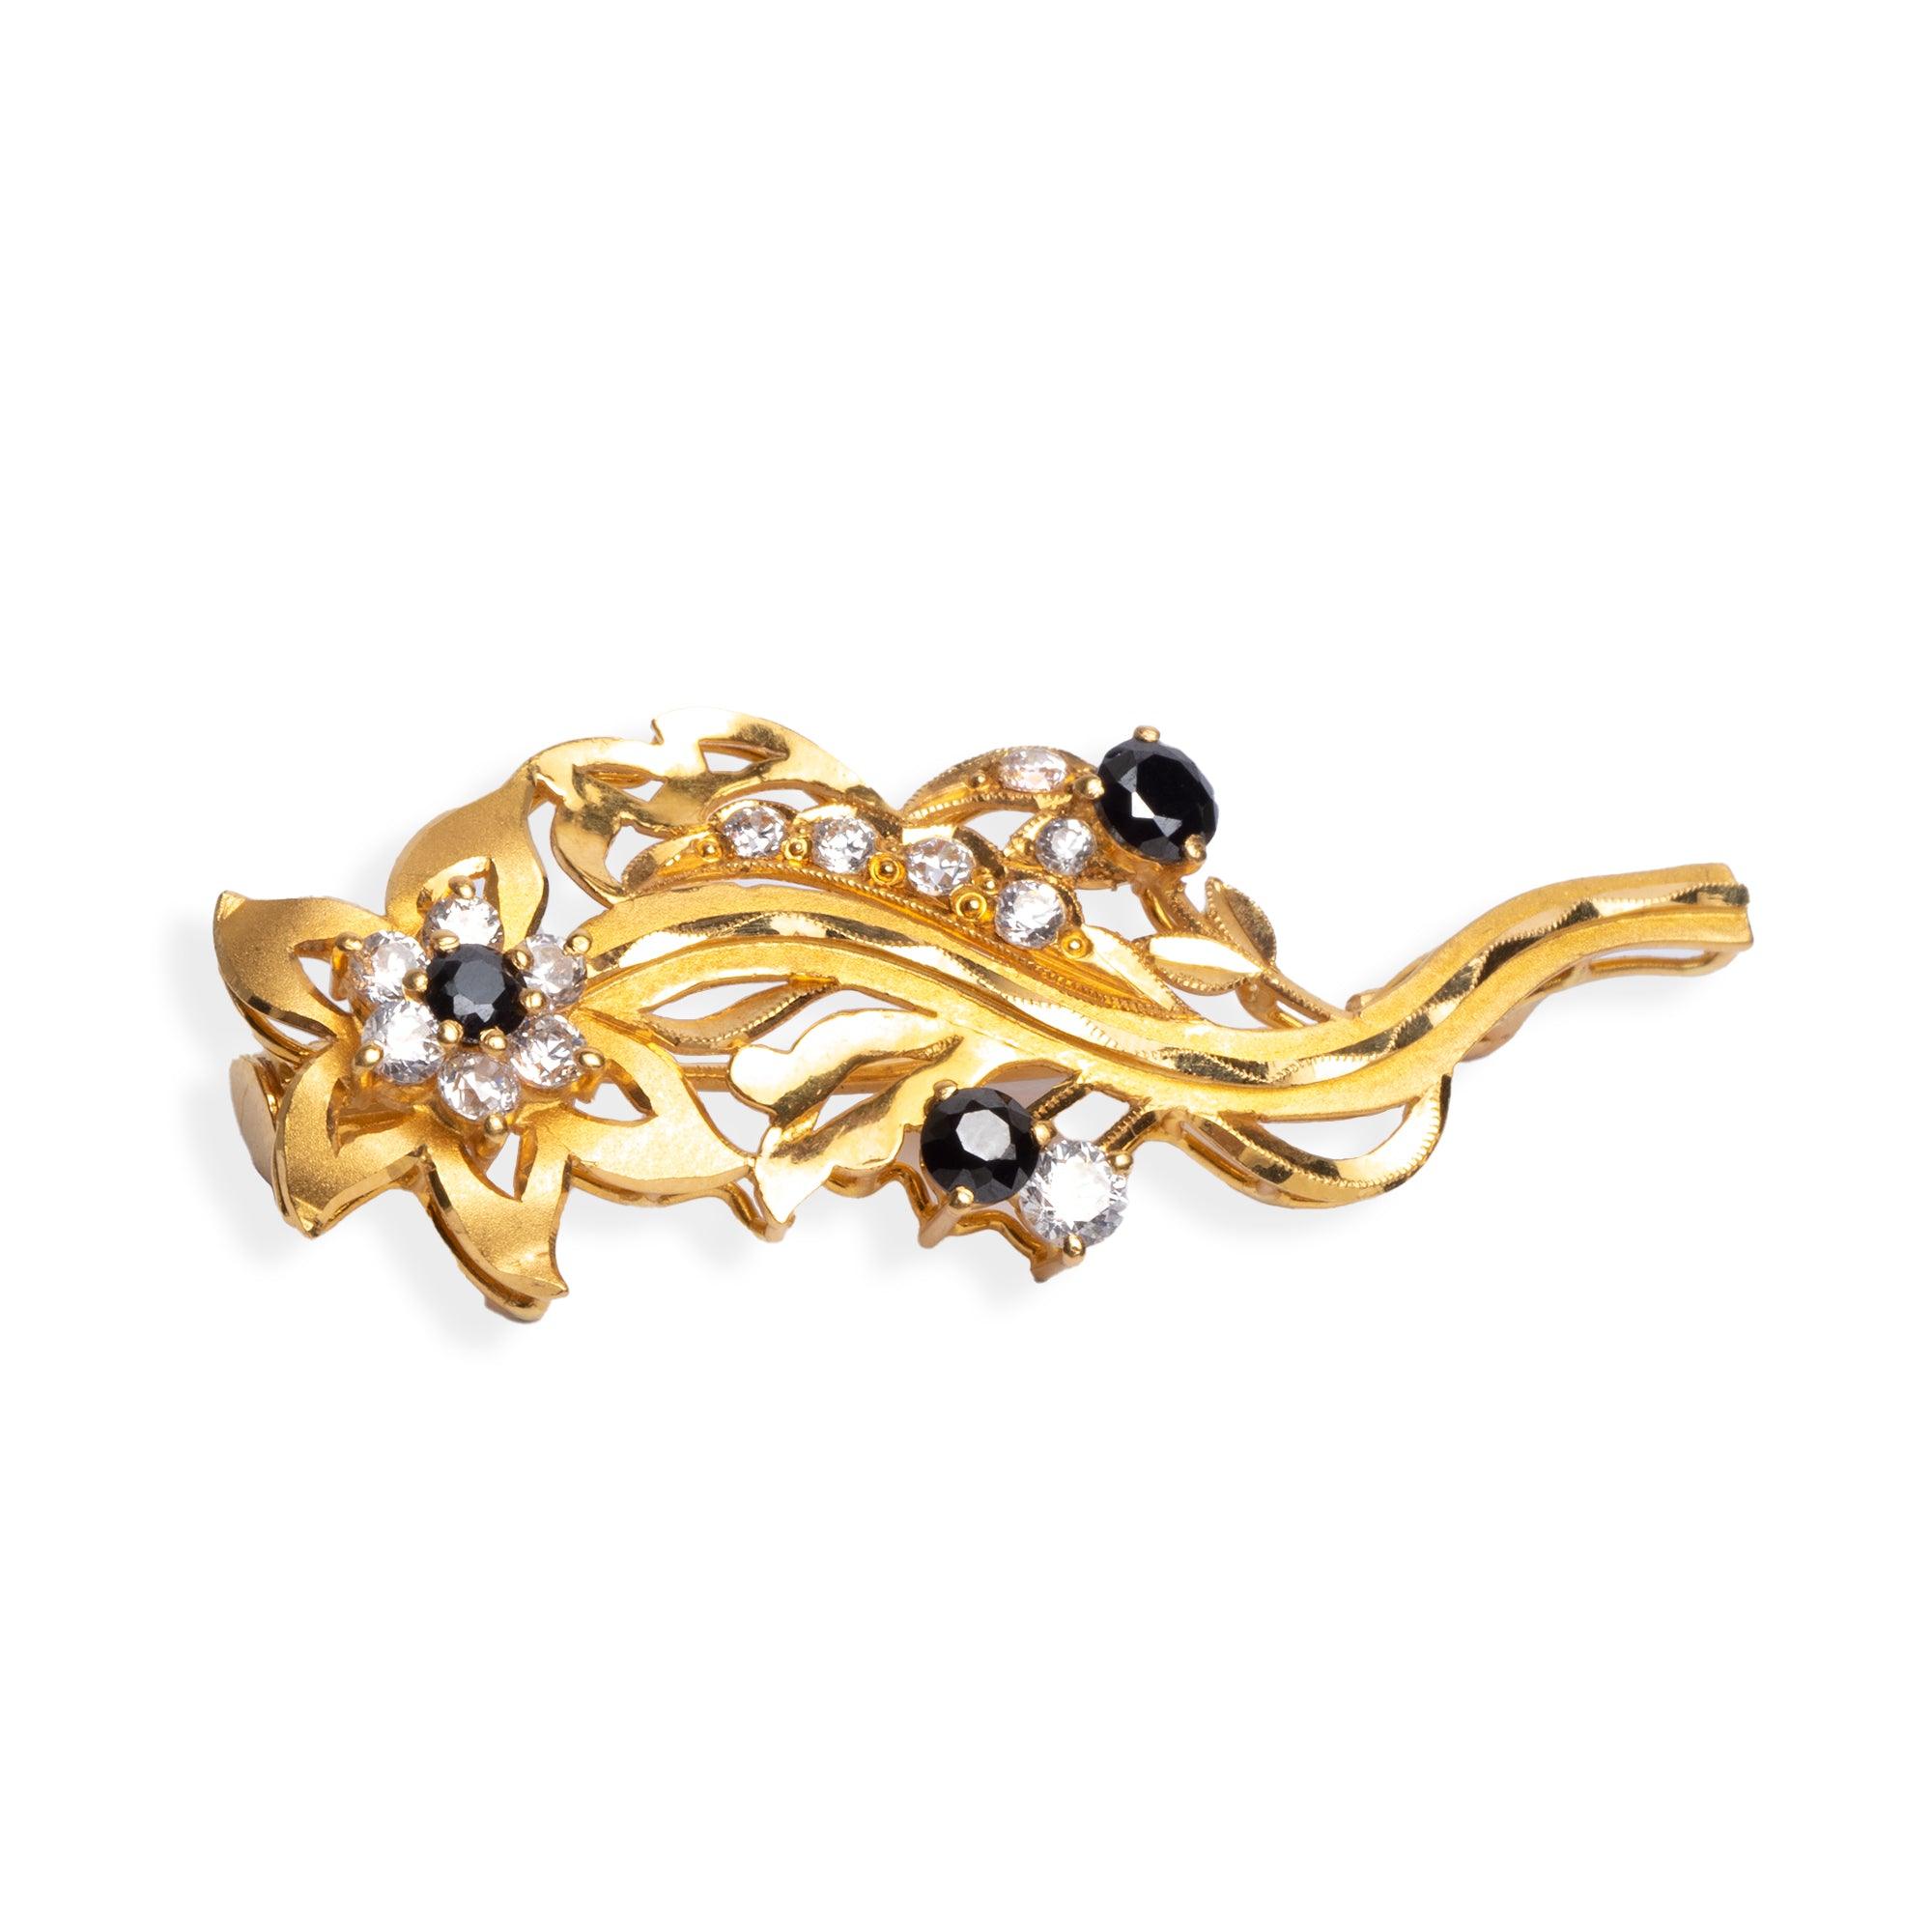 22ct Gold Brooch with White and Black Cubic Zirconia stones in Flower Design (8.3g) BRO-5885